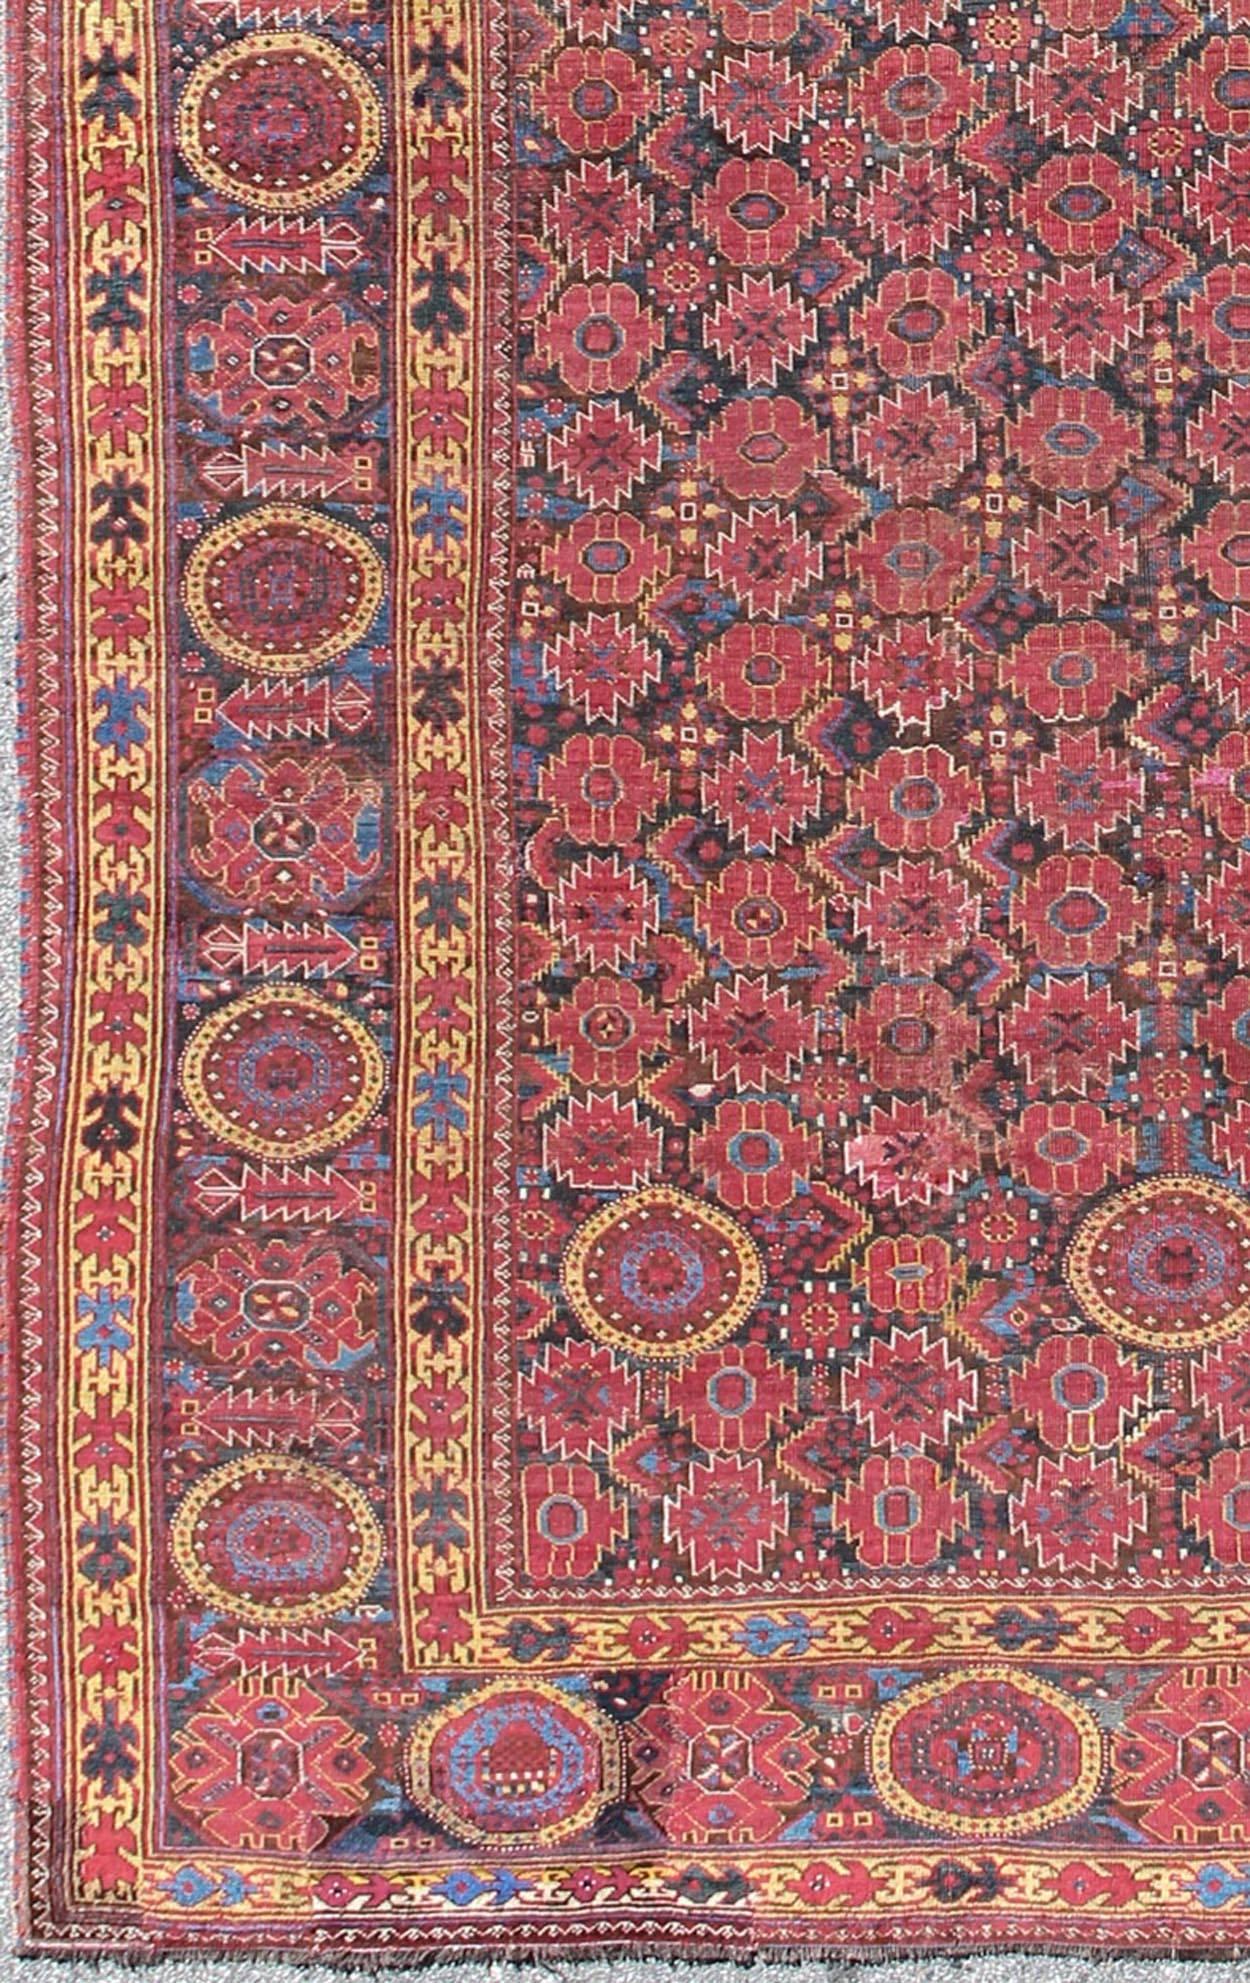 Antique Beshir Long Gallery Rug, rug/D-0508
This impressive antique Beshir rug displays an all-over geometric pattern with intermingled circular medallions. Set on brown/charcoal brown background, Colors include various shades of red, blue, purple